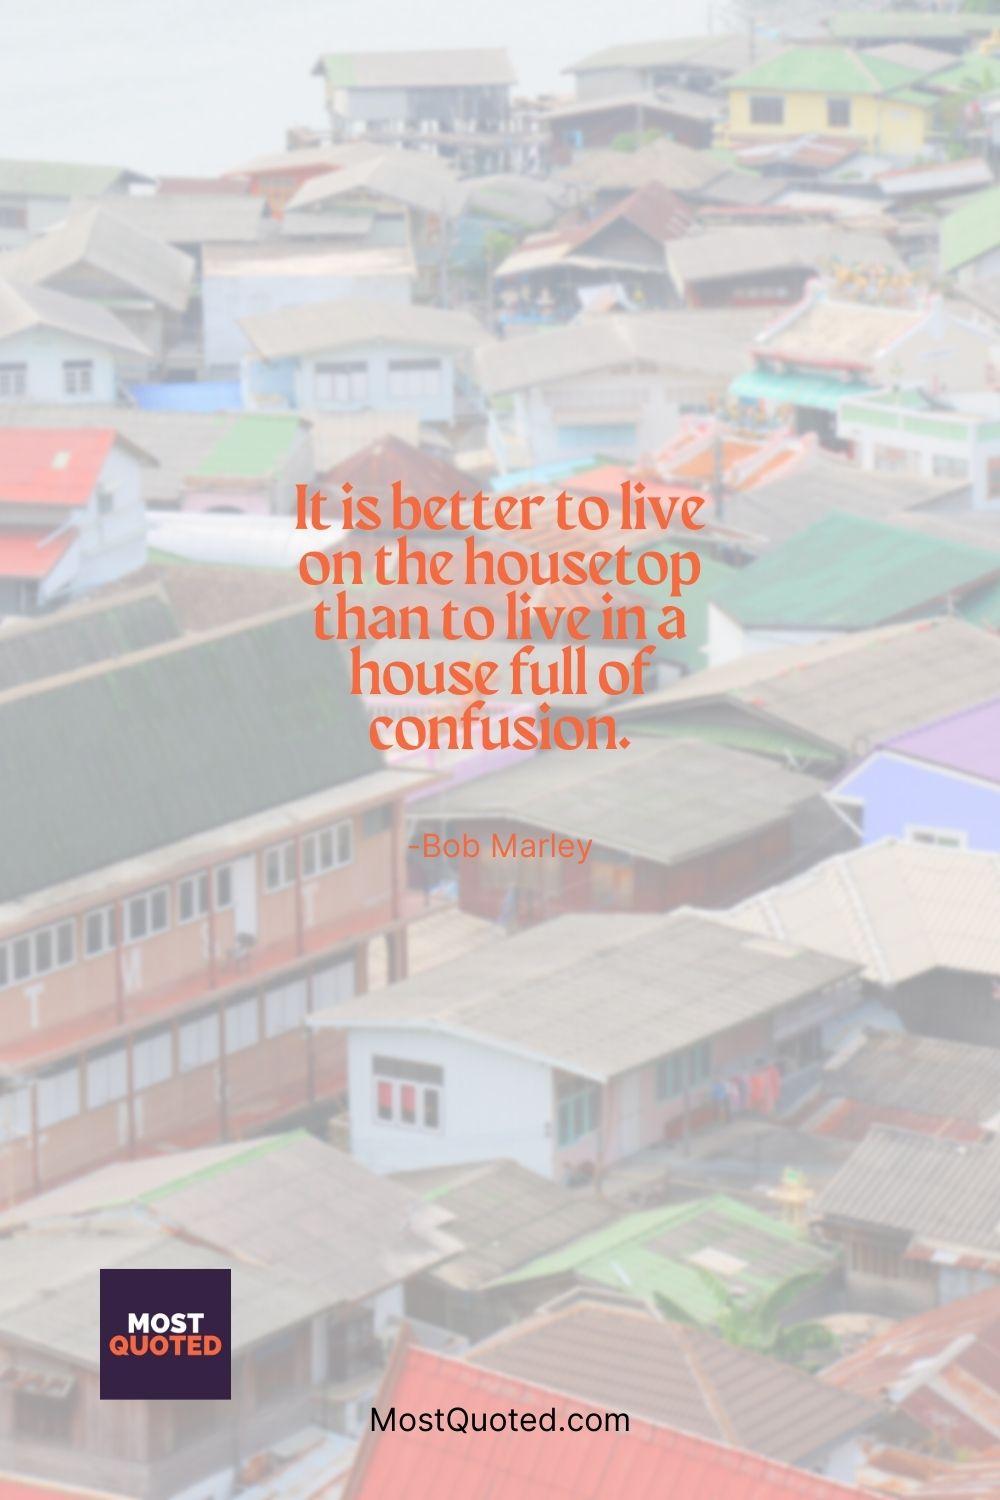 It is better to live on the housetop than to live in a house full of confusion. - Bob Marley